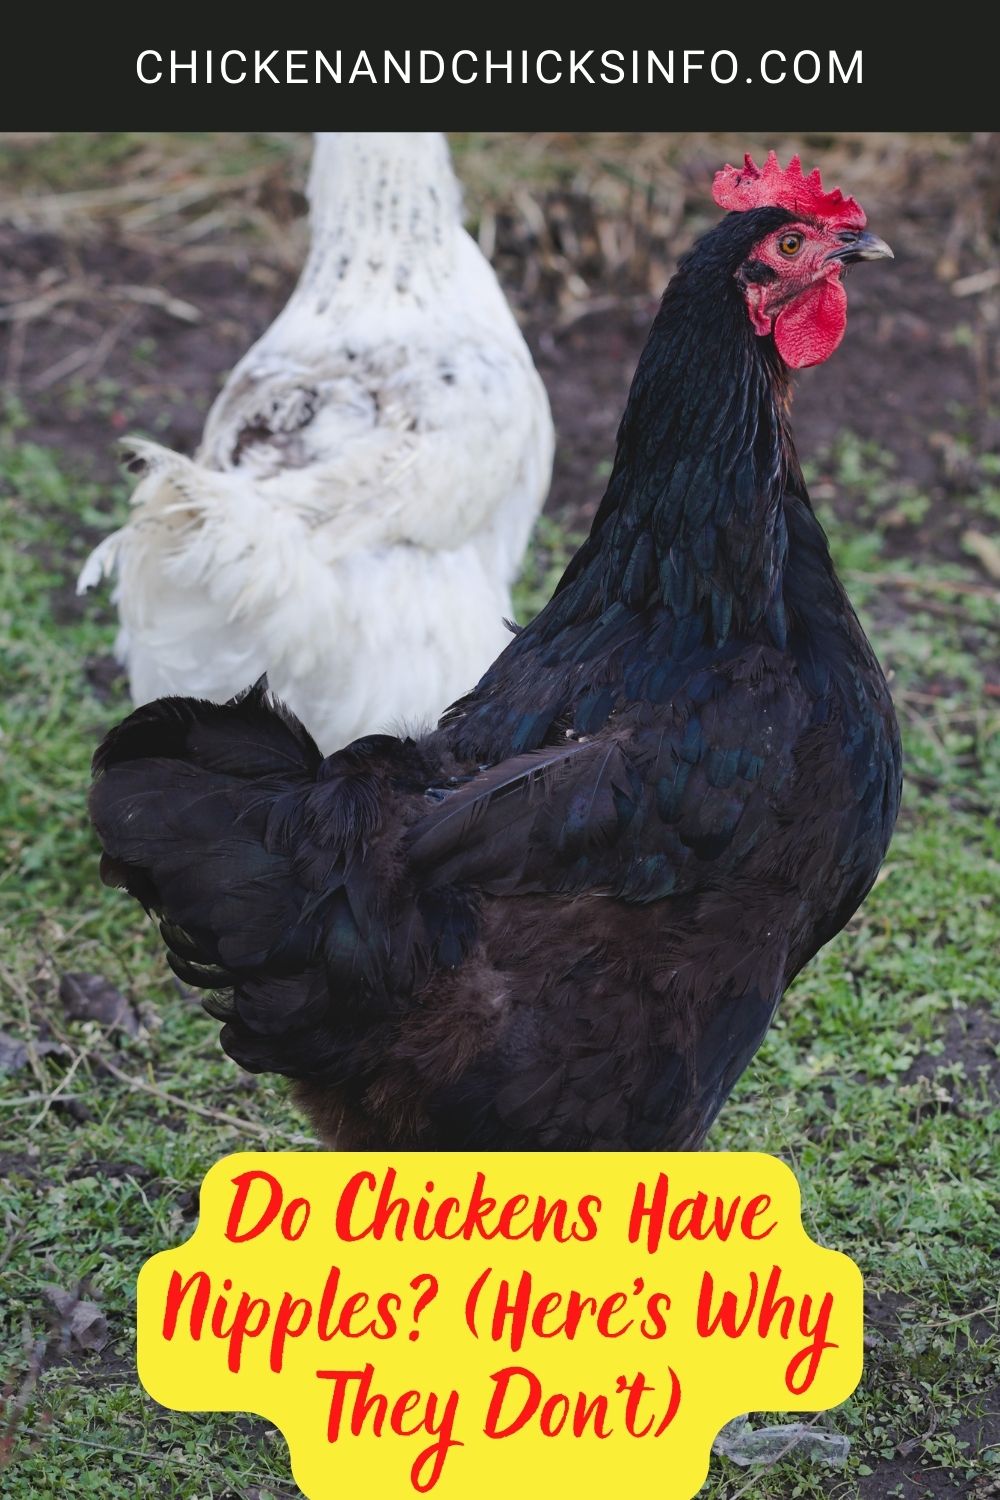 Do Chickens Have Nipples (Here's Why They Don't) poster.
